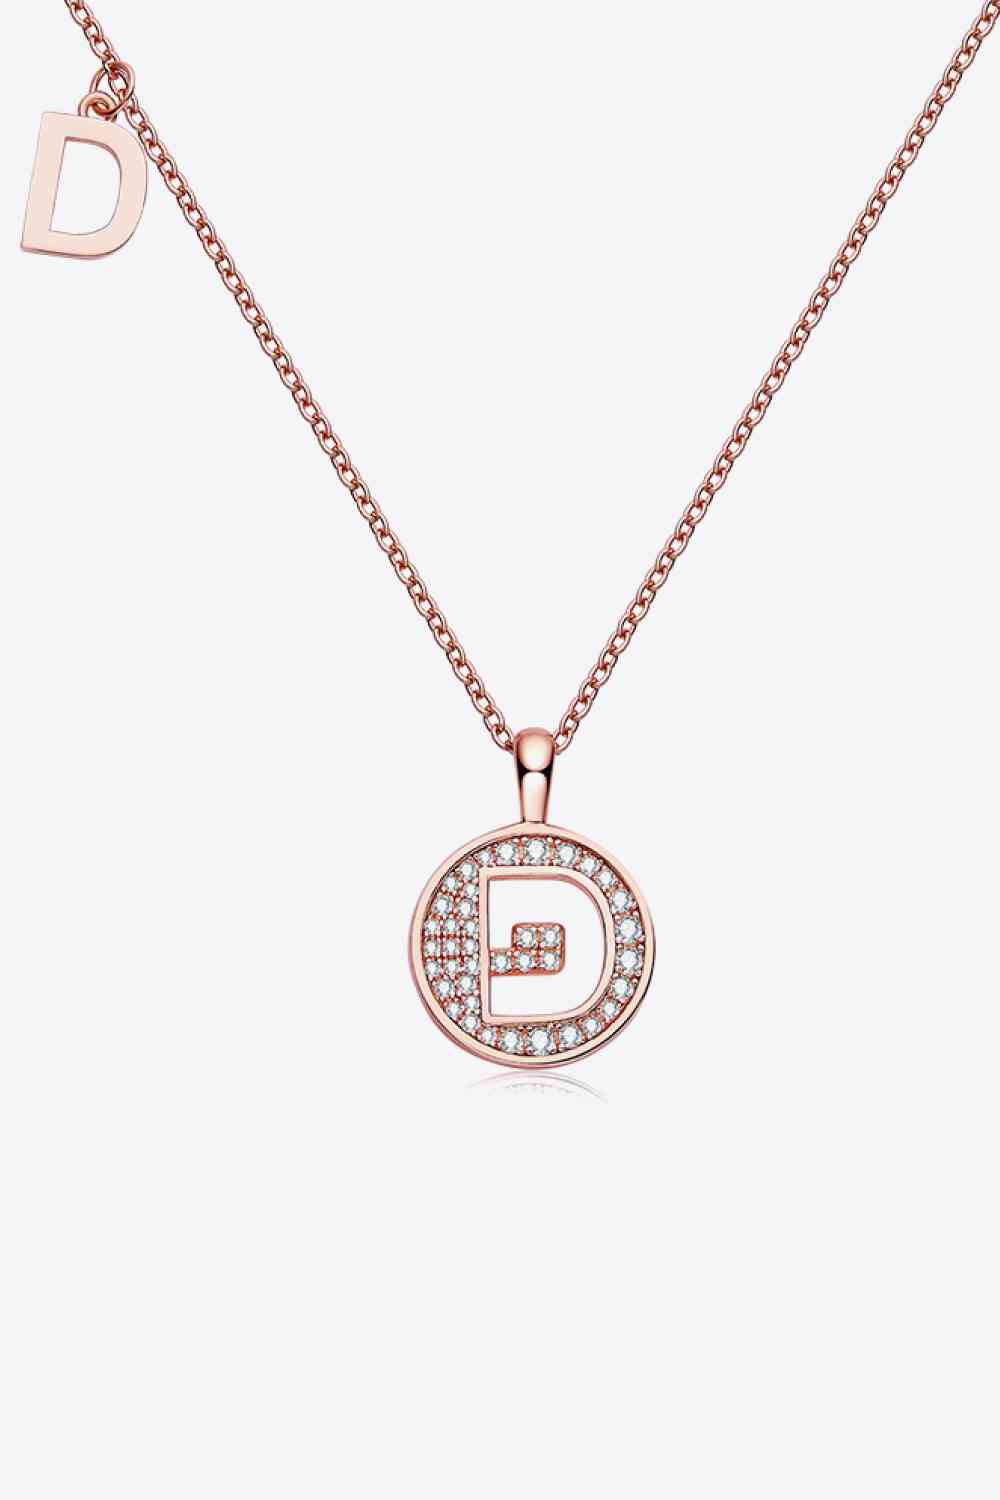 A to J Moissanite Pendant Necklace